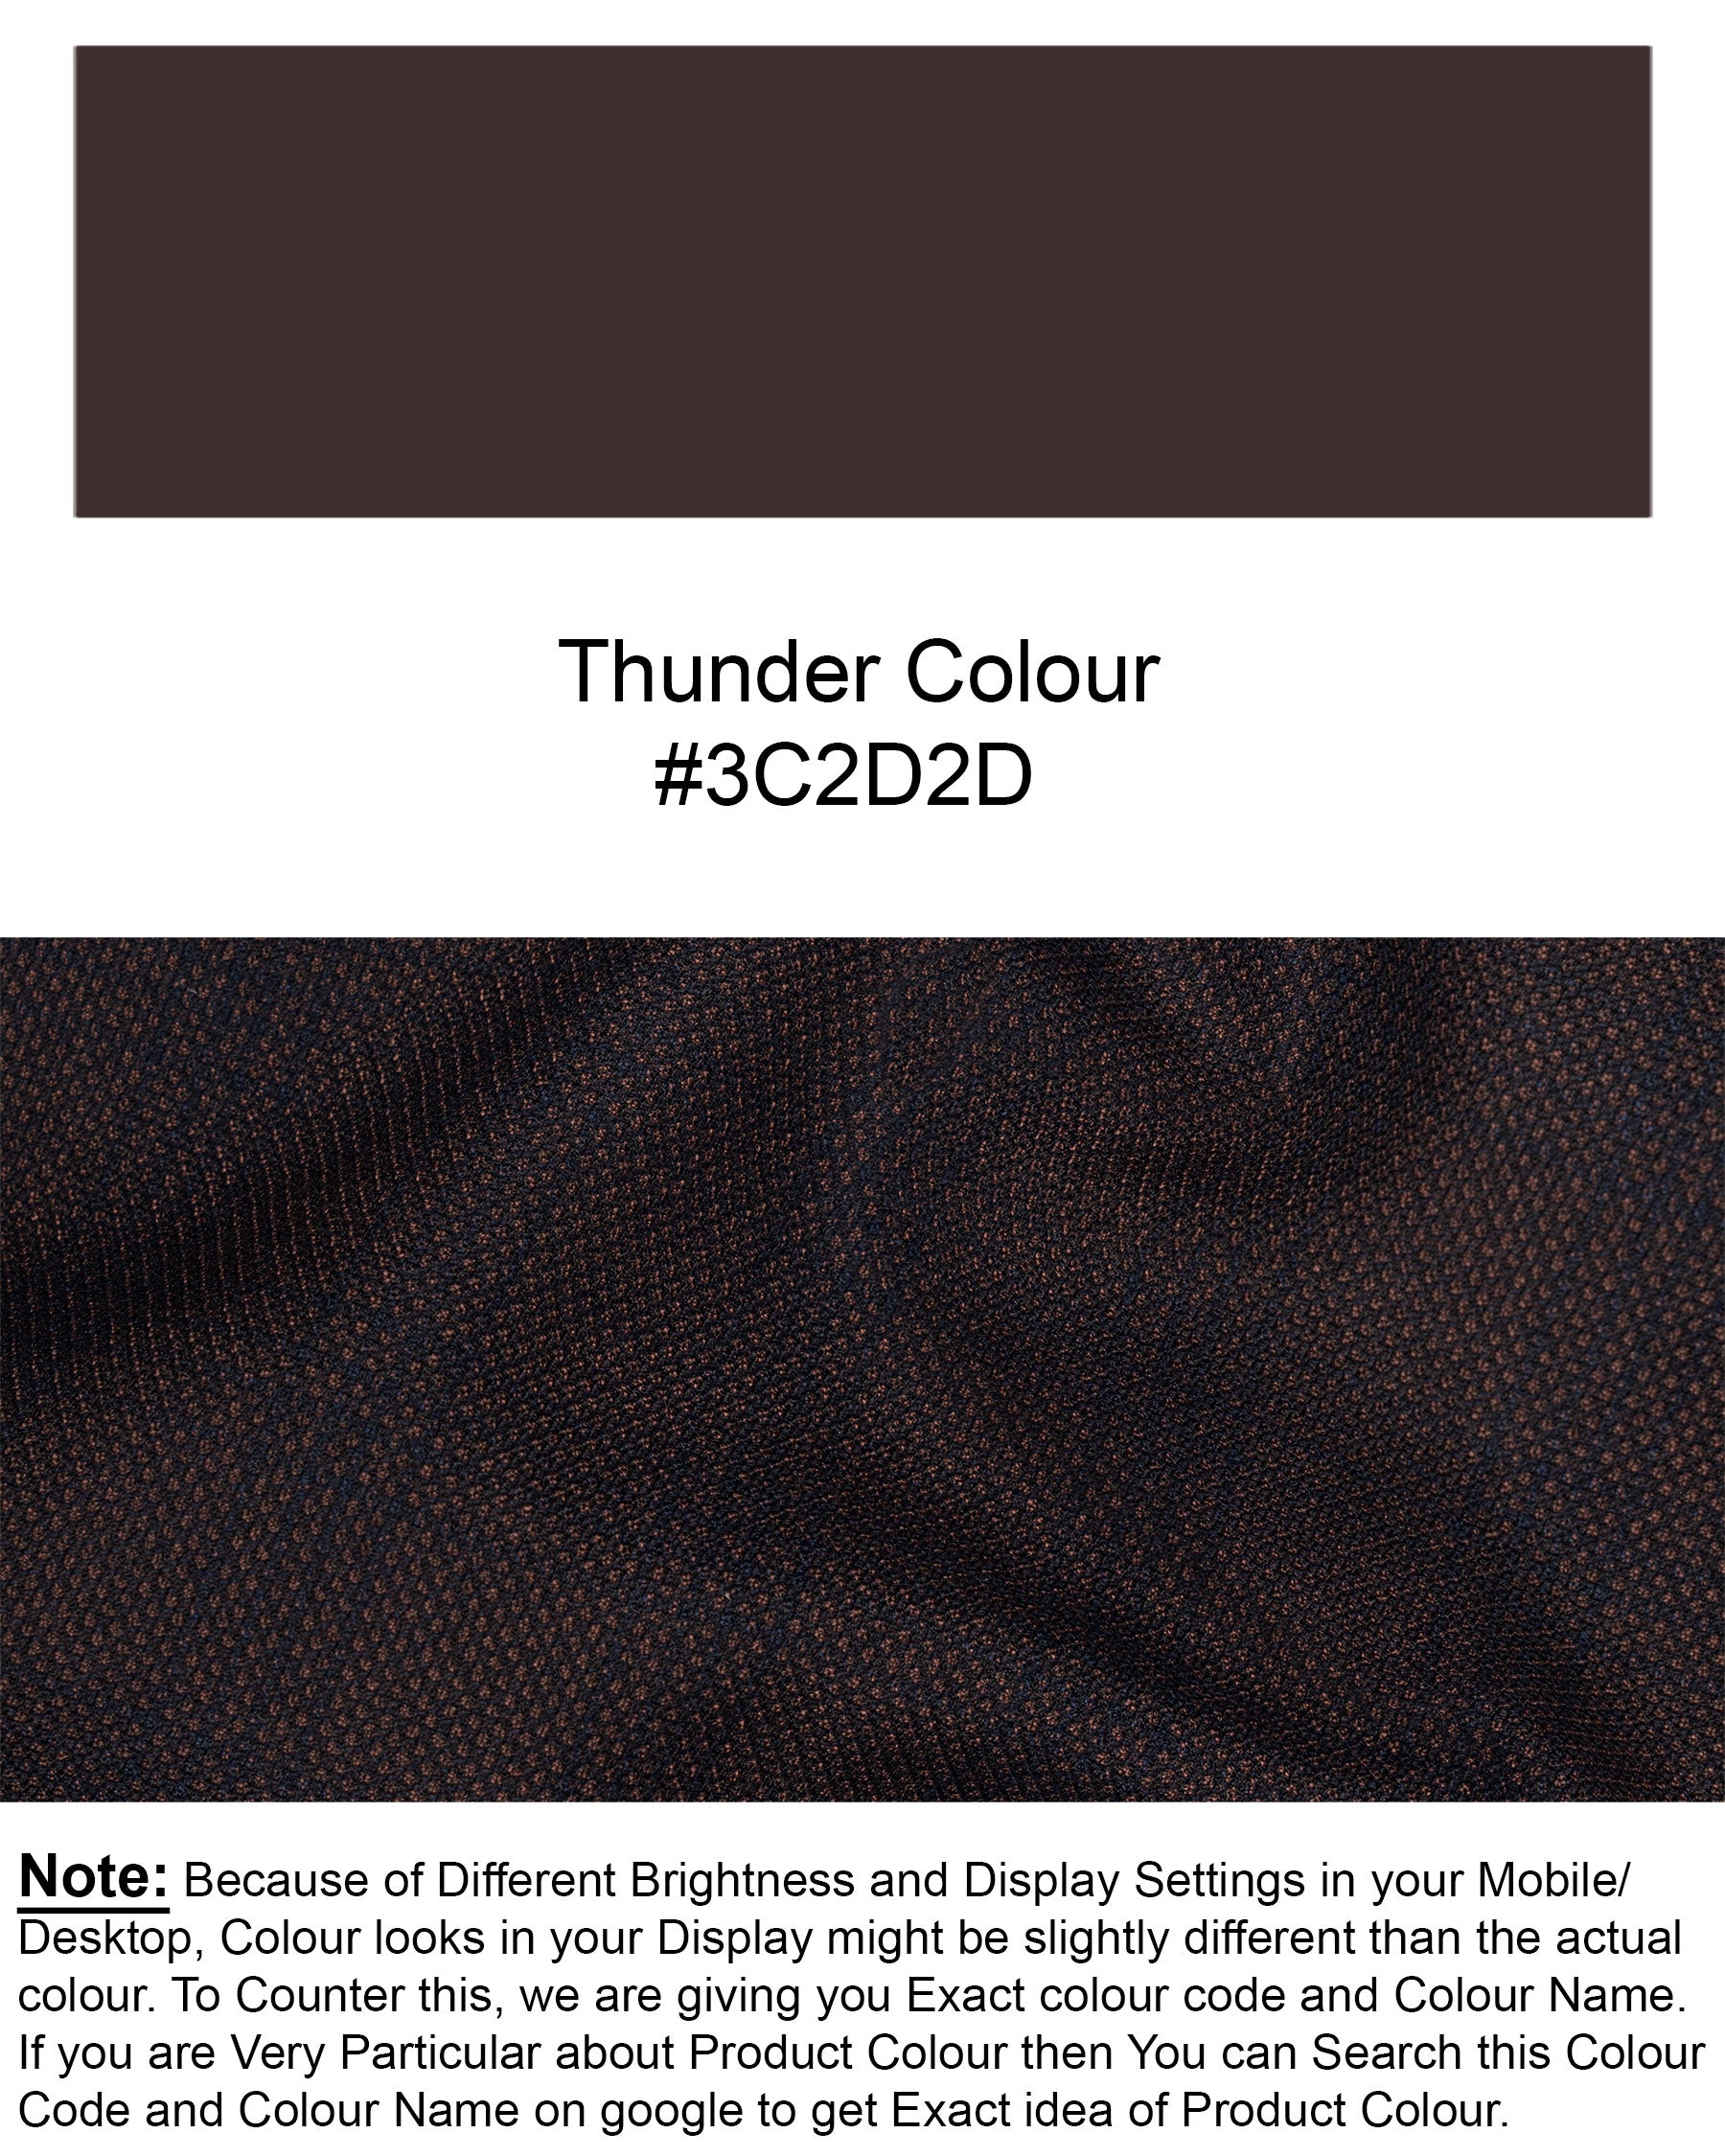 Thunder Brown Subtle Checkered Woolrich Pant T1625-28, T1625-30, T1625-32, T1625-34, T1625-36, T1625-38, T1625-40, T1625-42, T1625-44